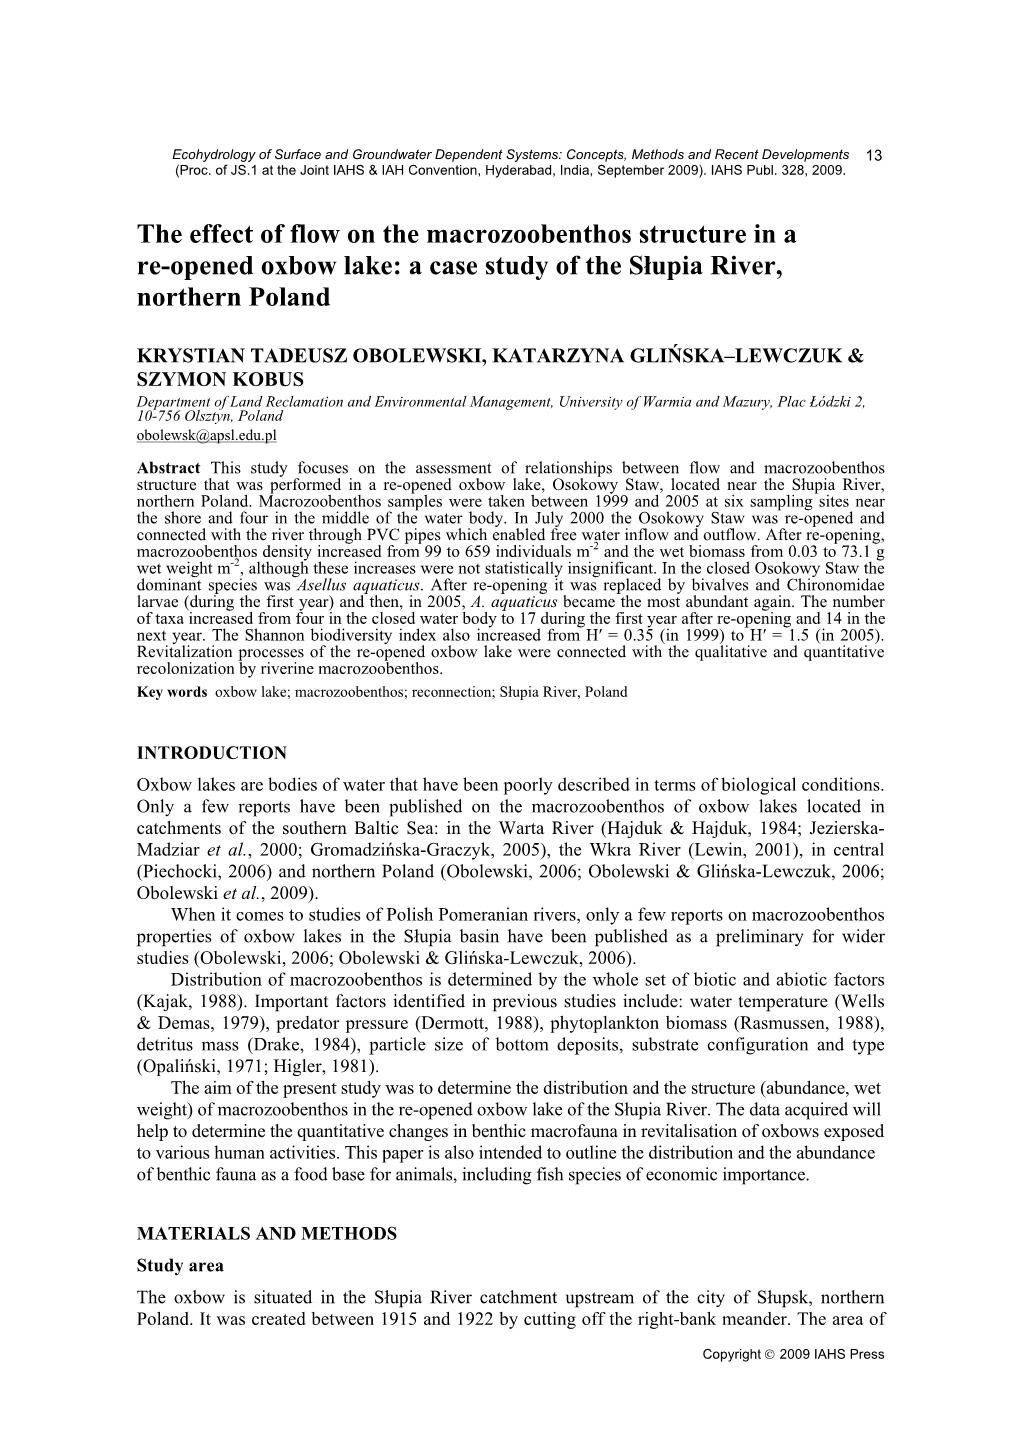 The Effect of Flow on the Macrozoobenthos Structure in a Re-Opened Oxbow Lake: a Case Study of the Słupia River, Northern Poland